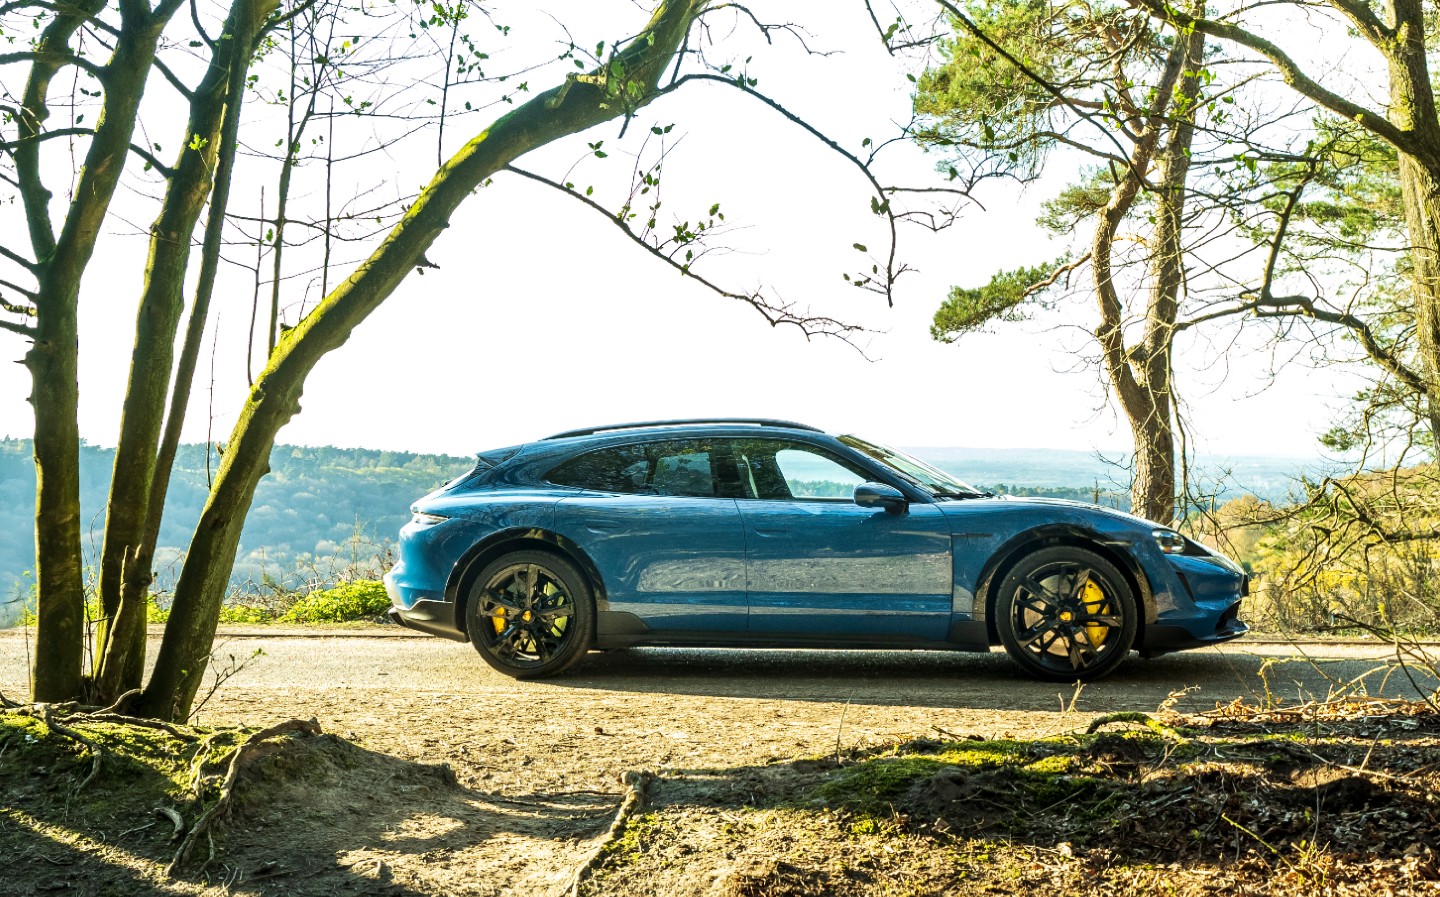 Porsche Taycan Turbo S Cross Turismo review by Will Dron for Sunday Times Driving.co.uk